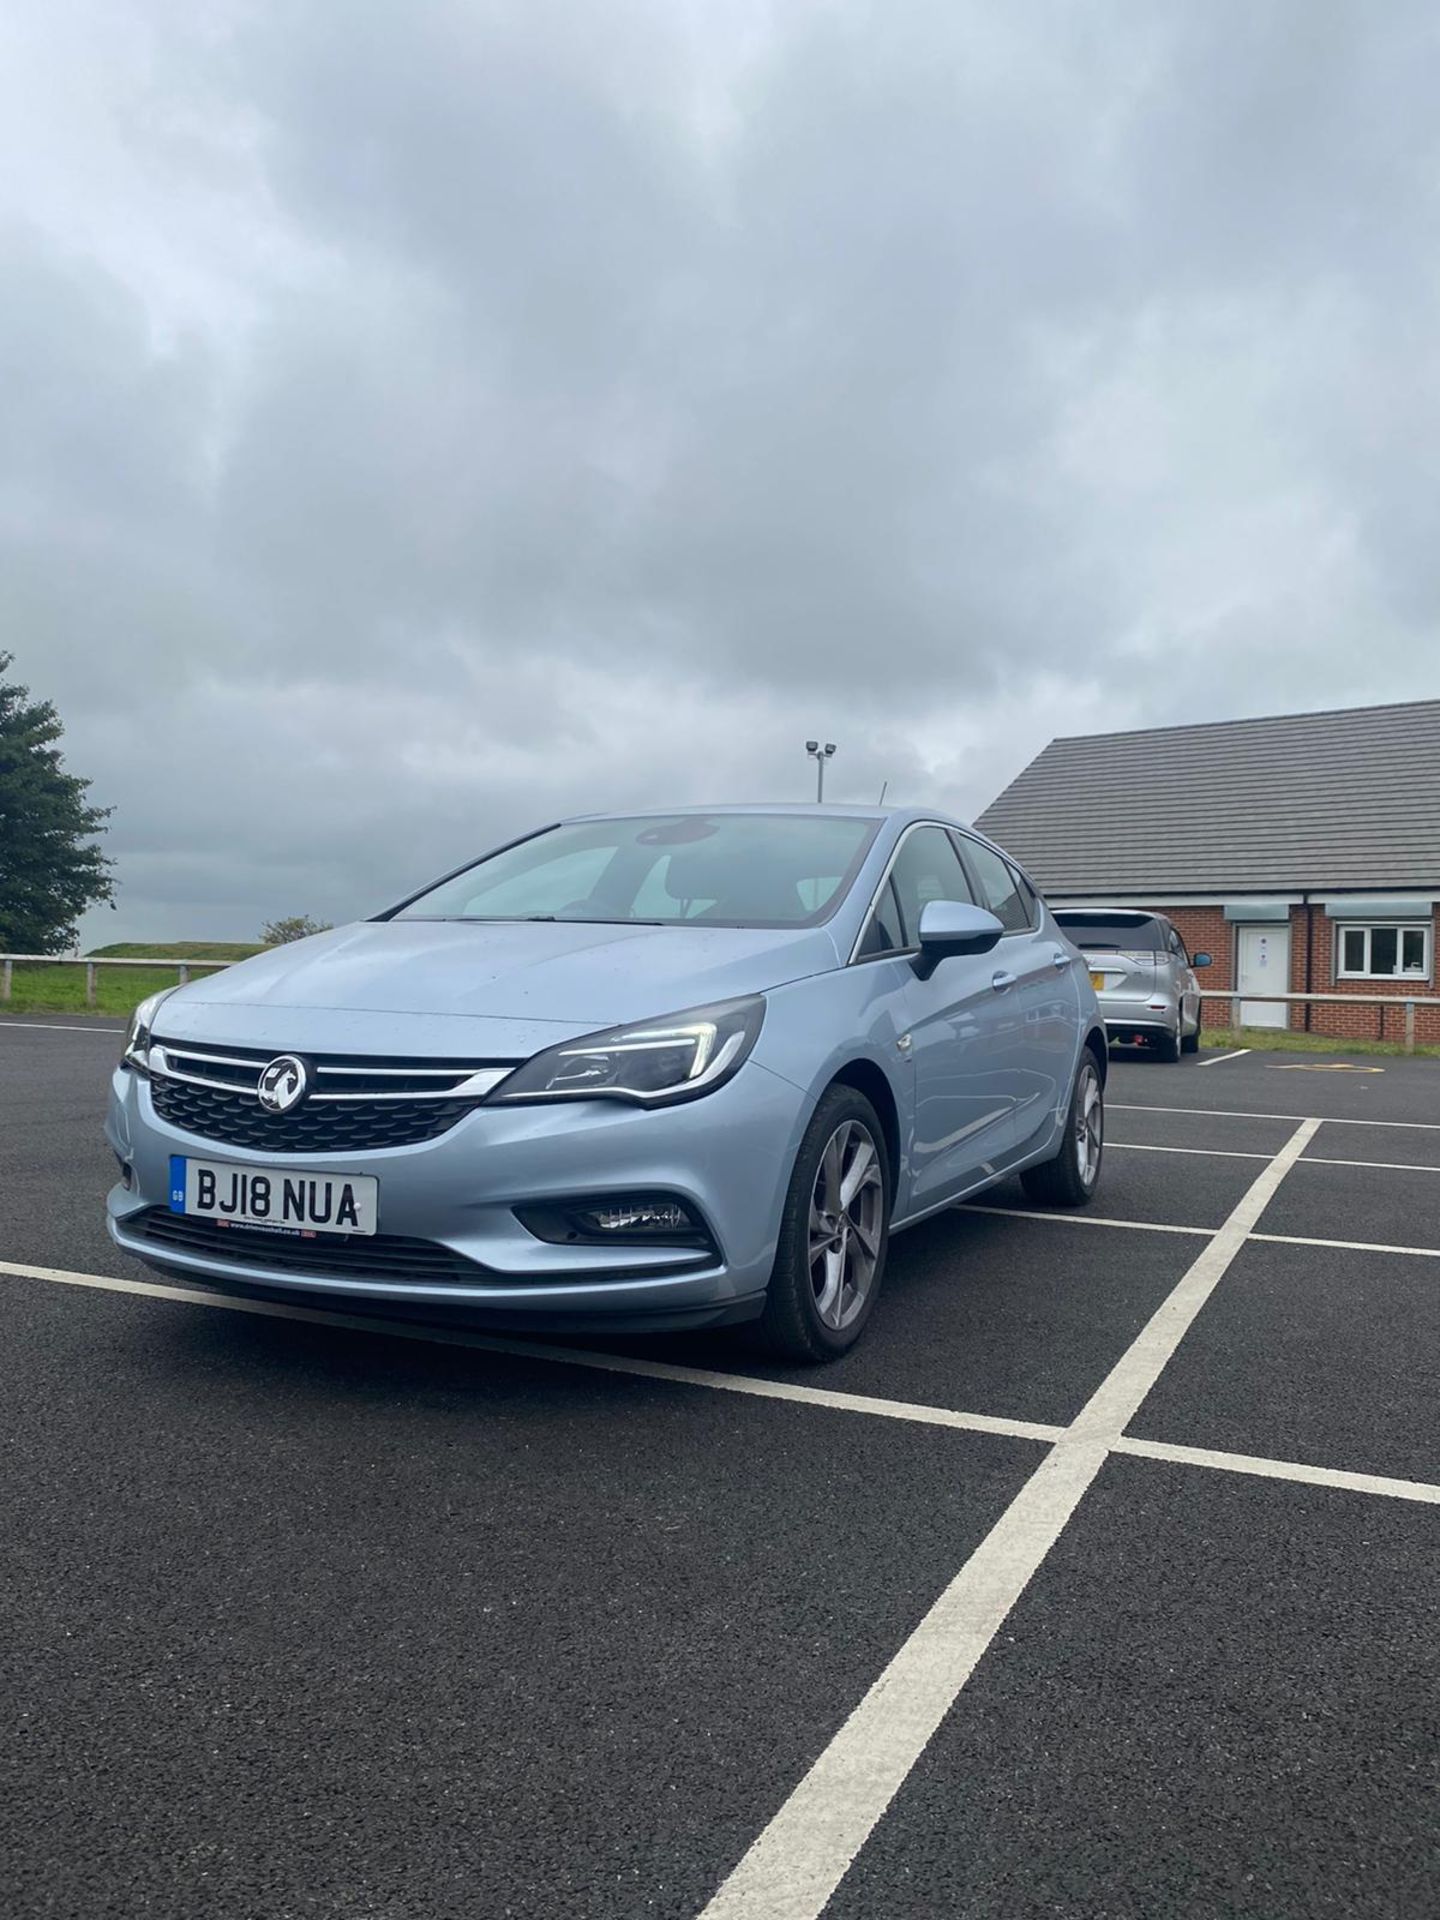 2018/18 REG VAUXHALL ASTRA SRI TURBO 1.4 PETROL SILVER 5 DOOR HATCHBACK, SHOWING 2 FORMER KEEPERS - Image 3 of 12